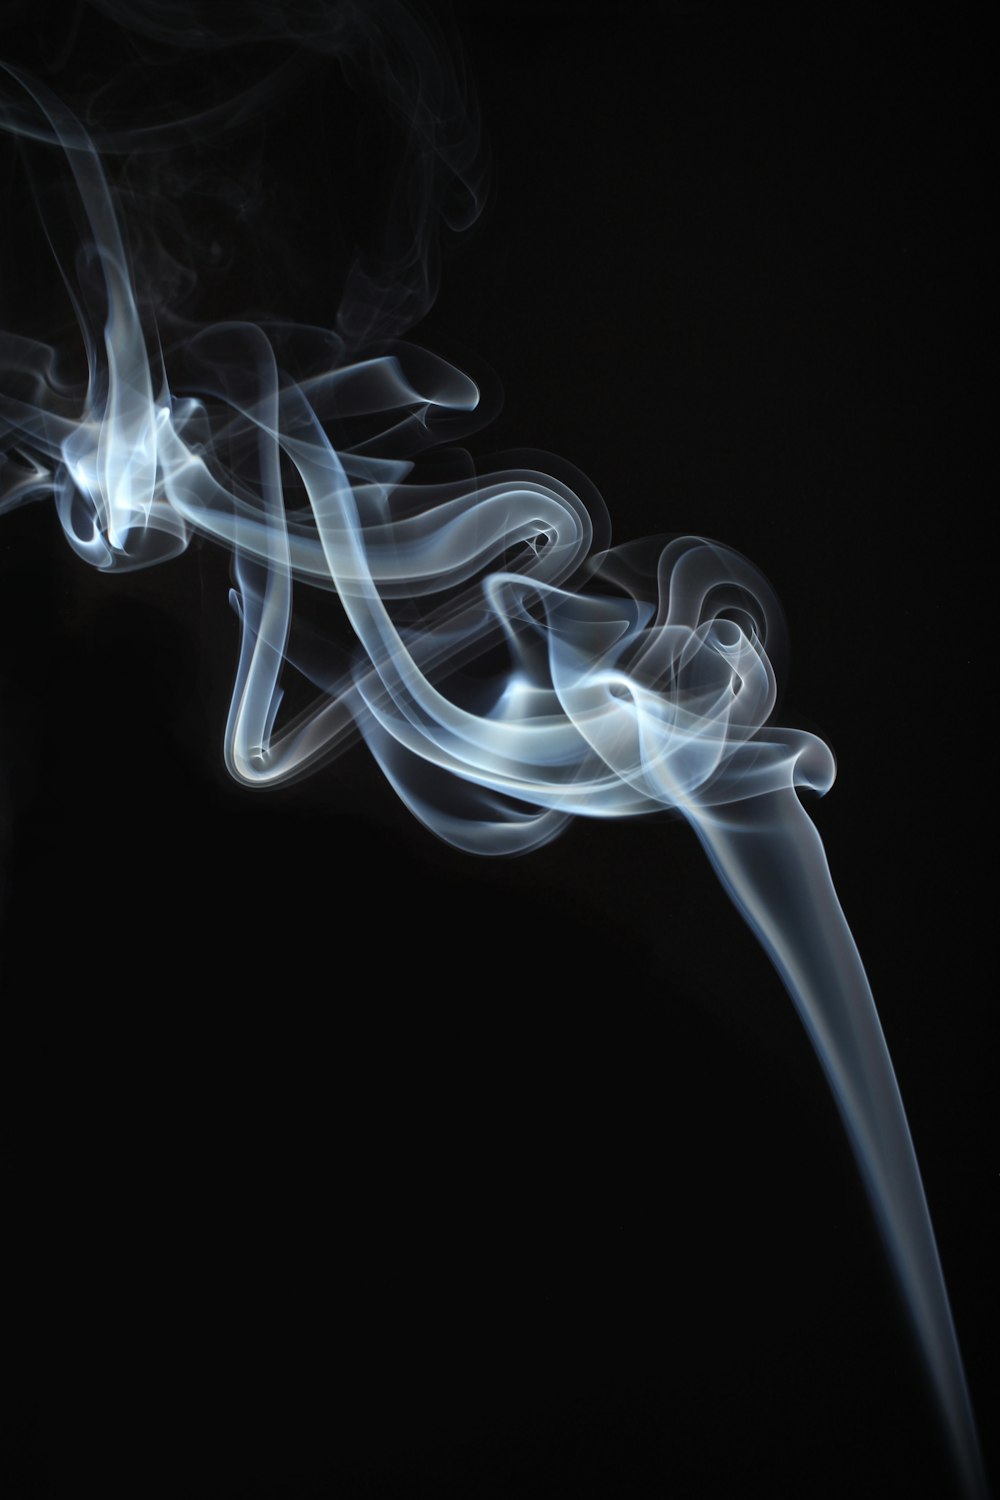 Black And White Smoke Pictures | Download Free Images on Unsplash